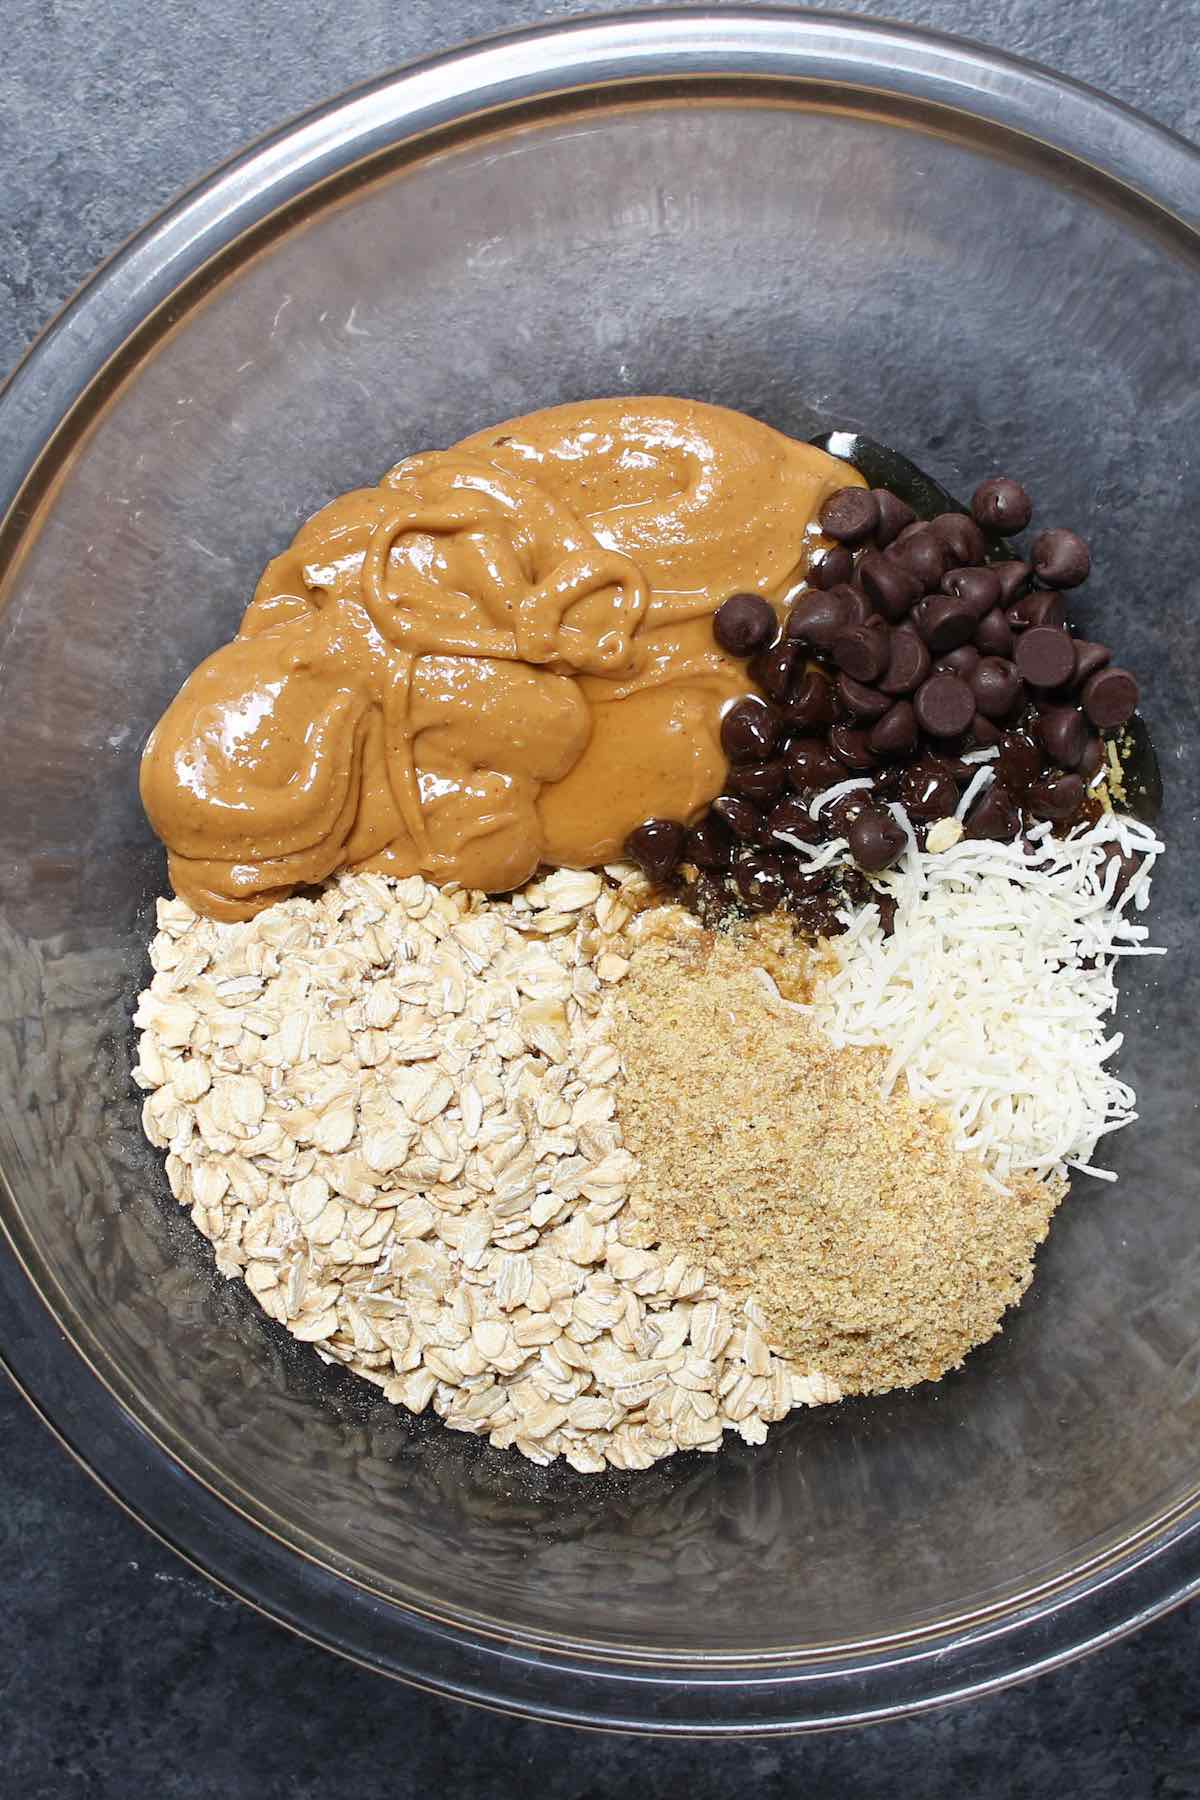 Ingredients used in an energy balls recipe in a mixing bowl: rolled oats, peanut butter, flaxseed meal, shredded coconut, chocolate chips, maple syrup and vanilla